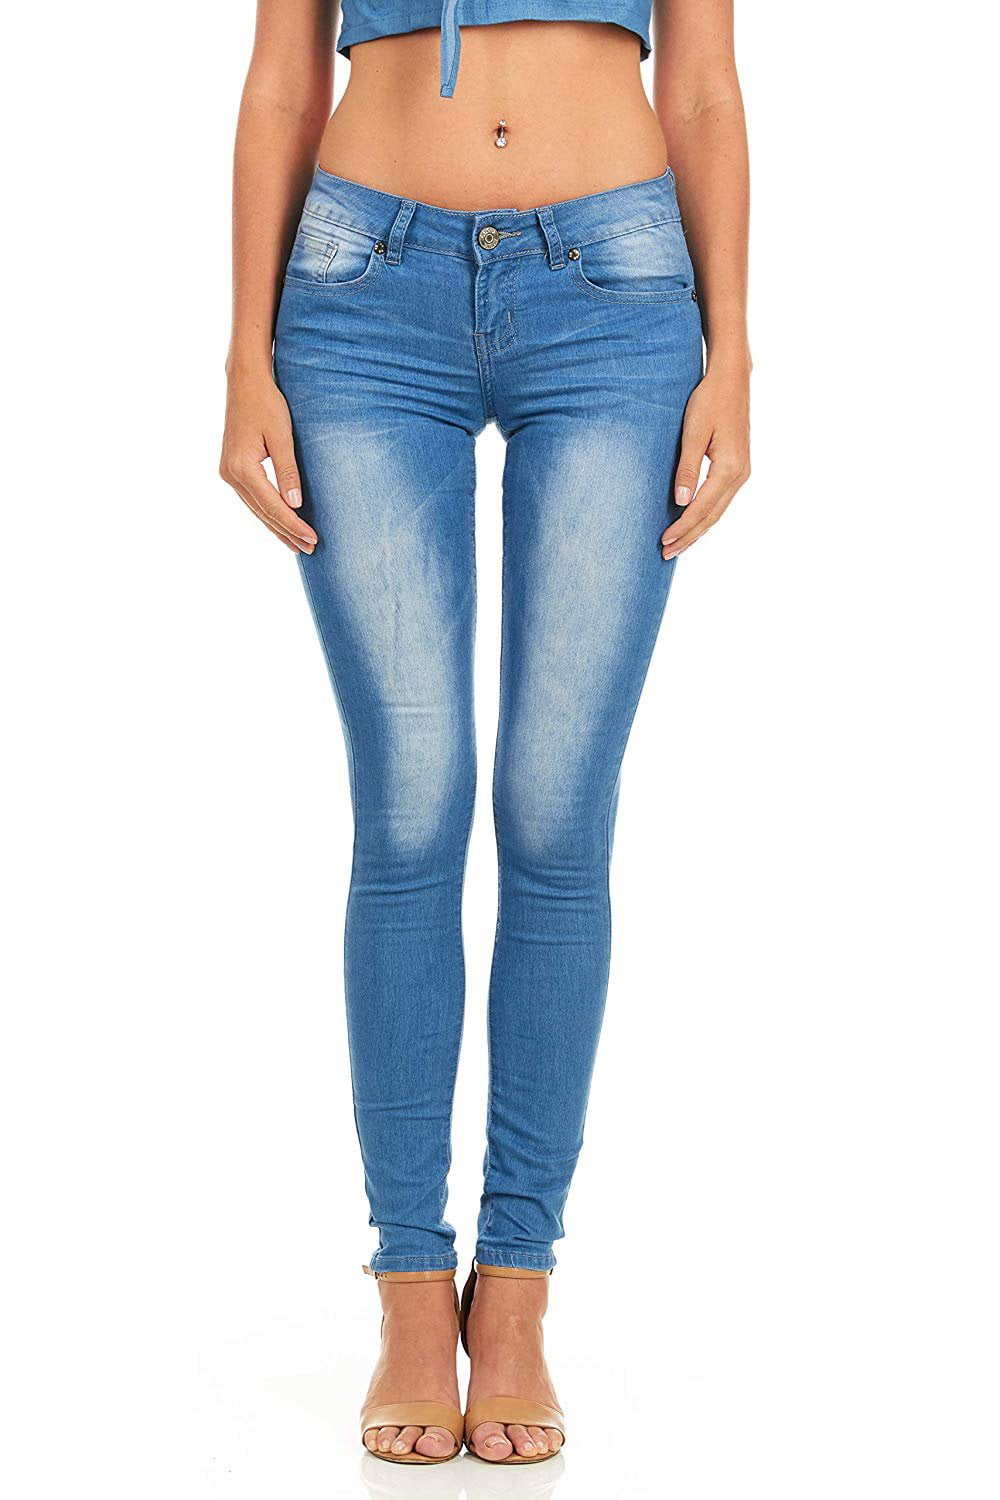 low rise slim fit jeans womens